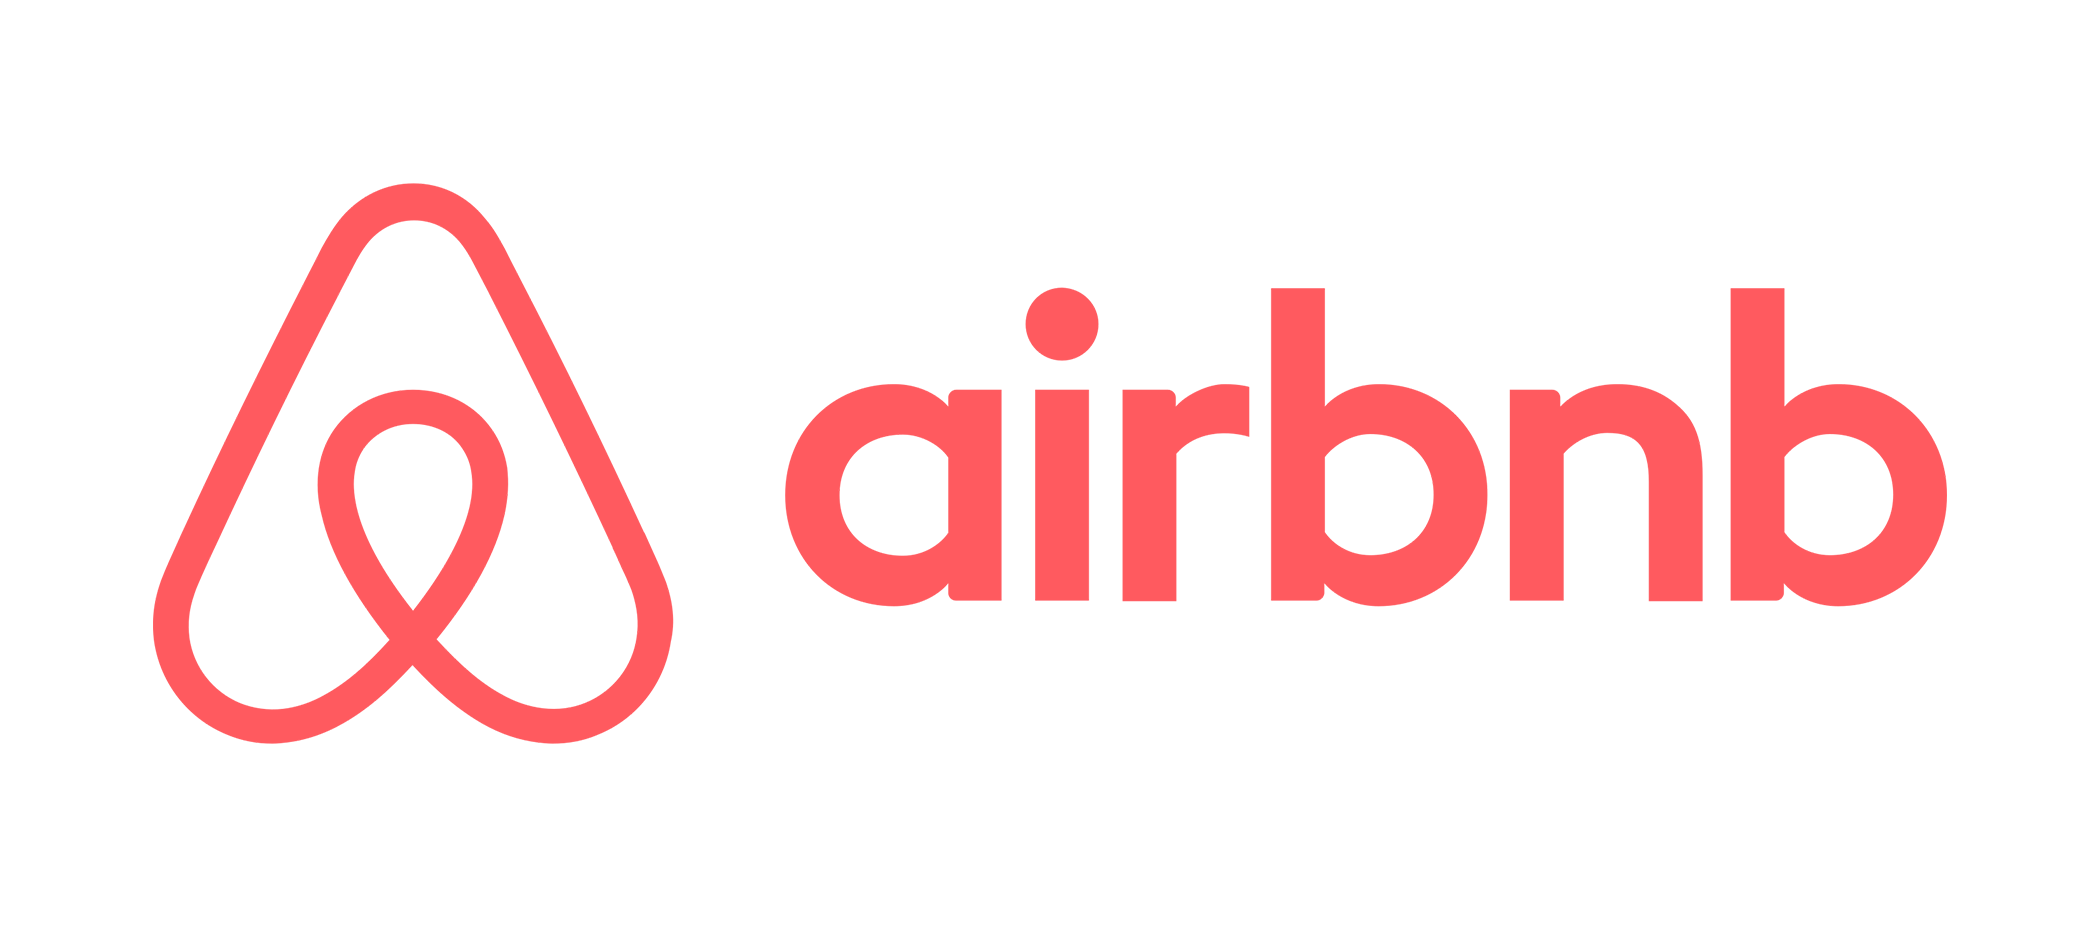 AirBnb.png